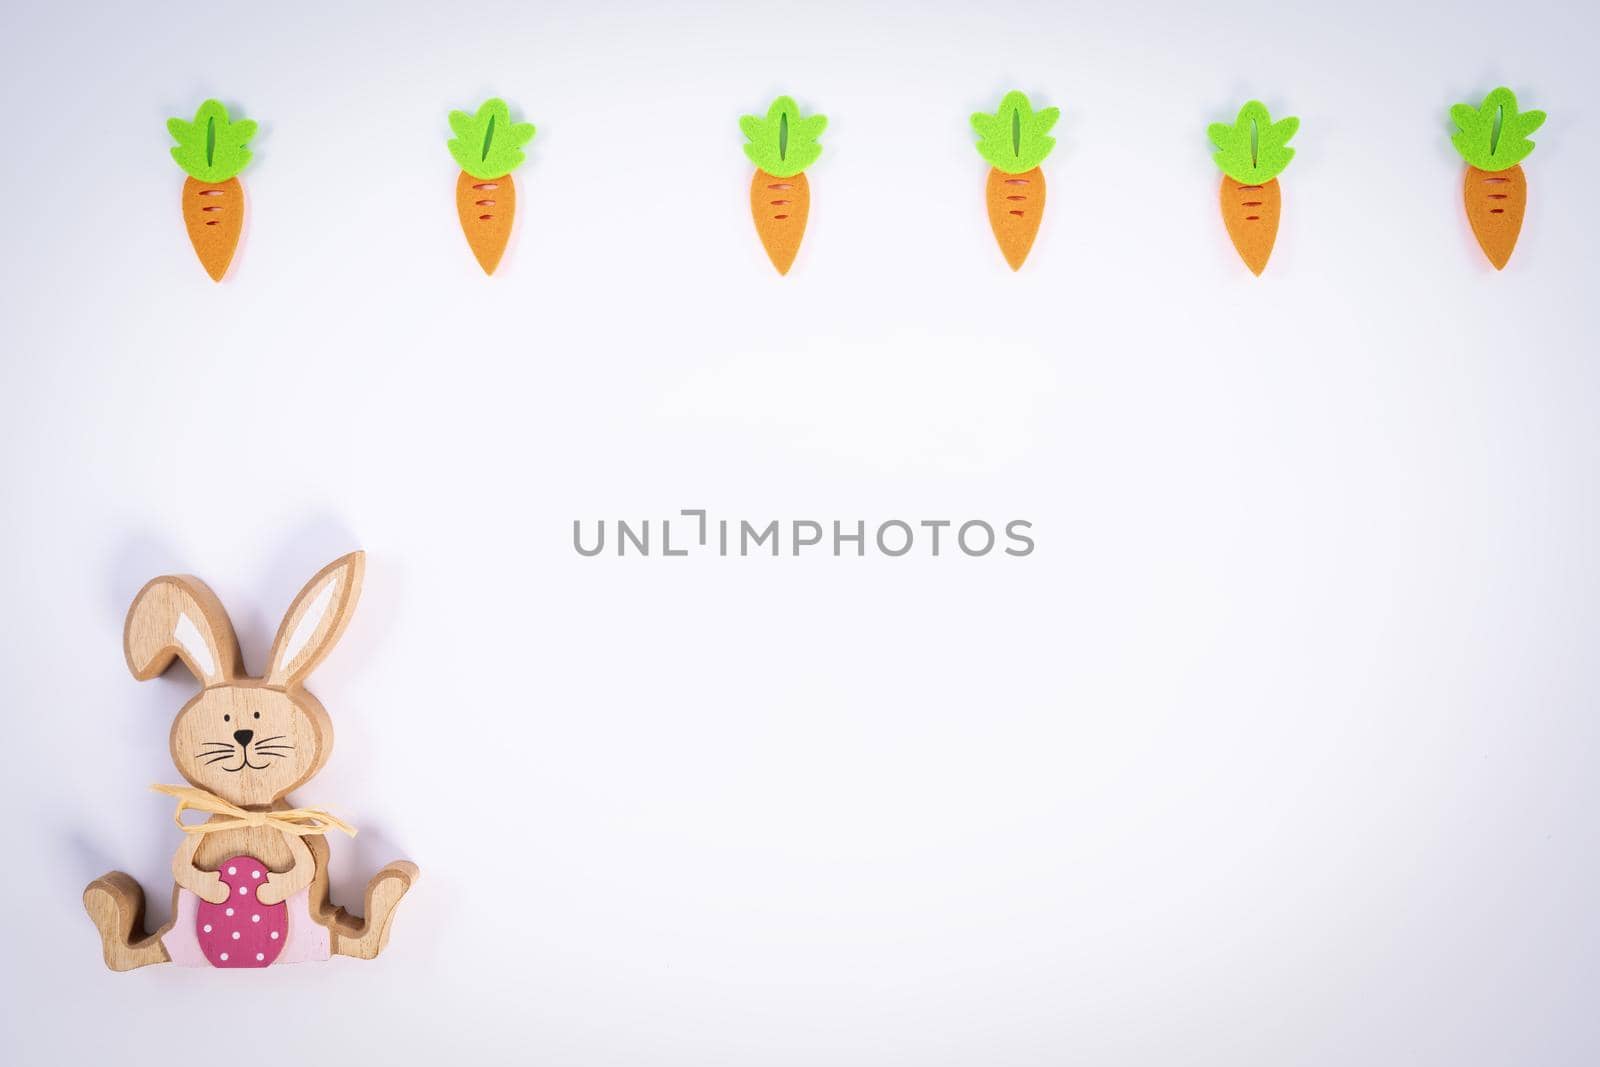 Cute Easter pattern with carrots and Easter bunny by Mendelex